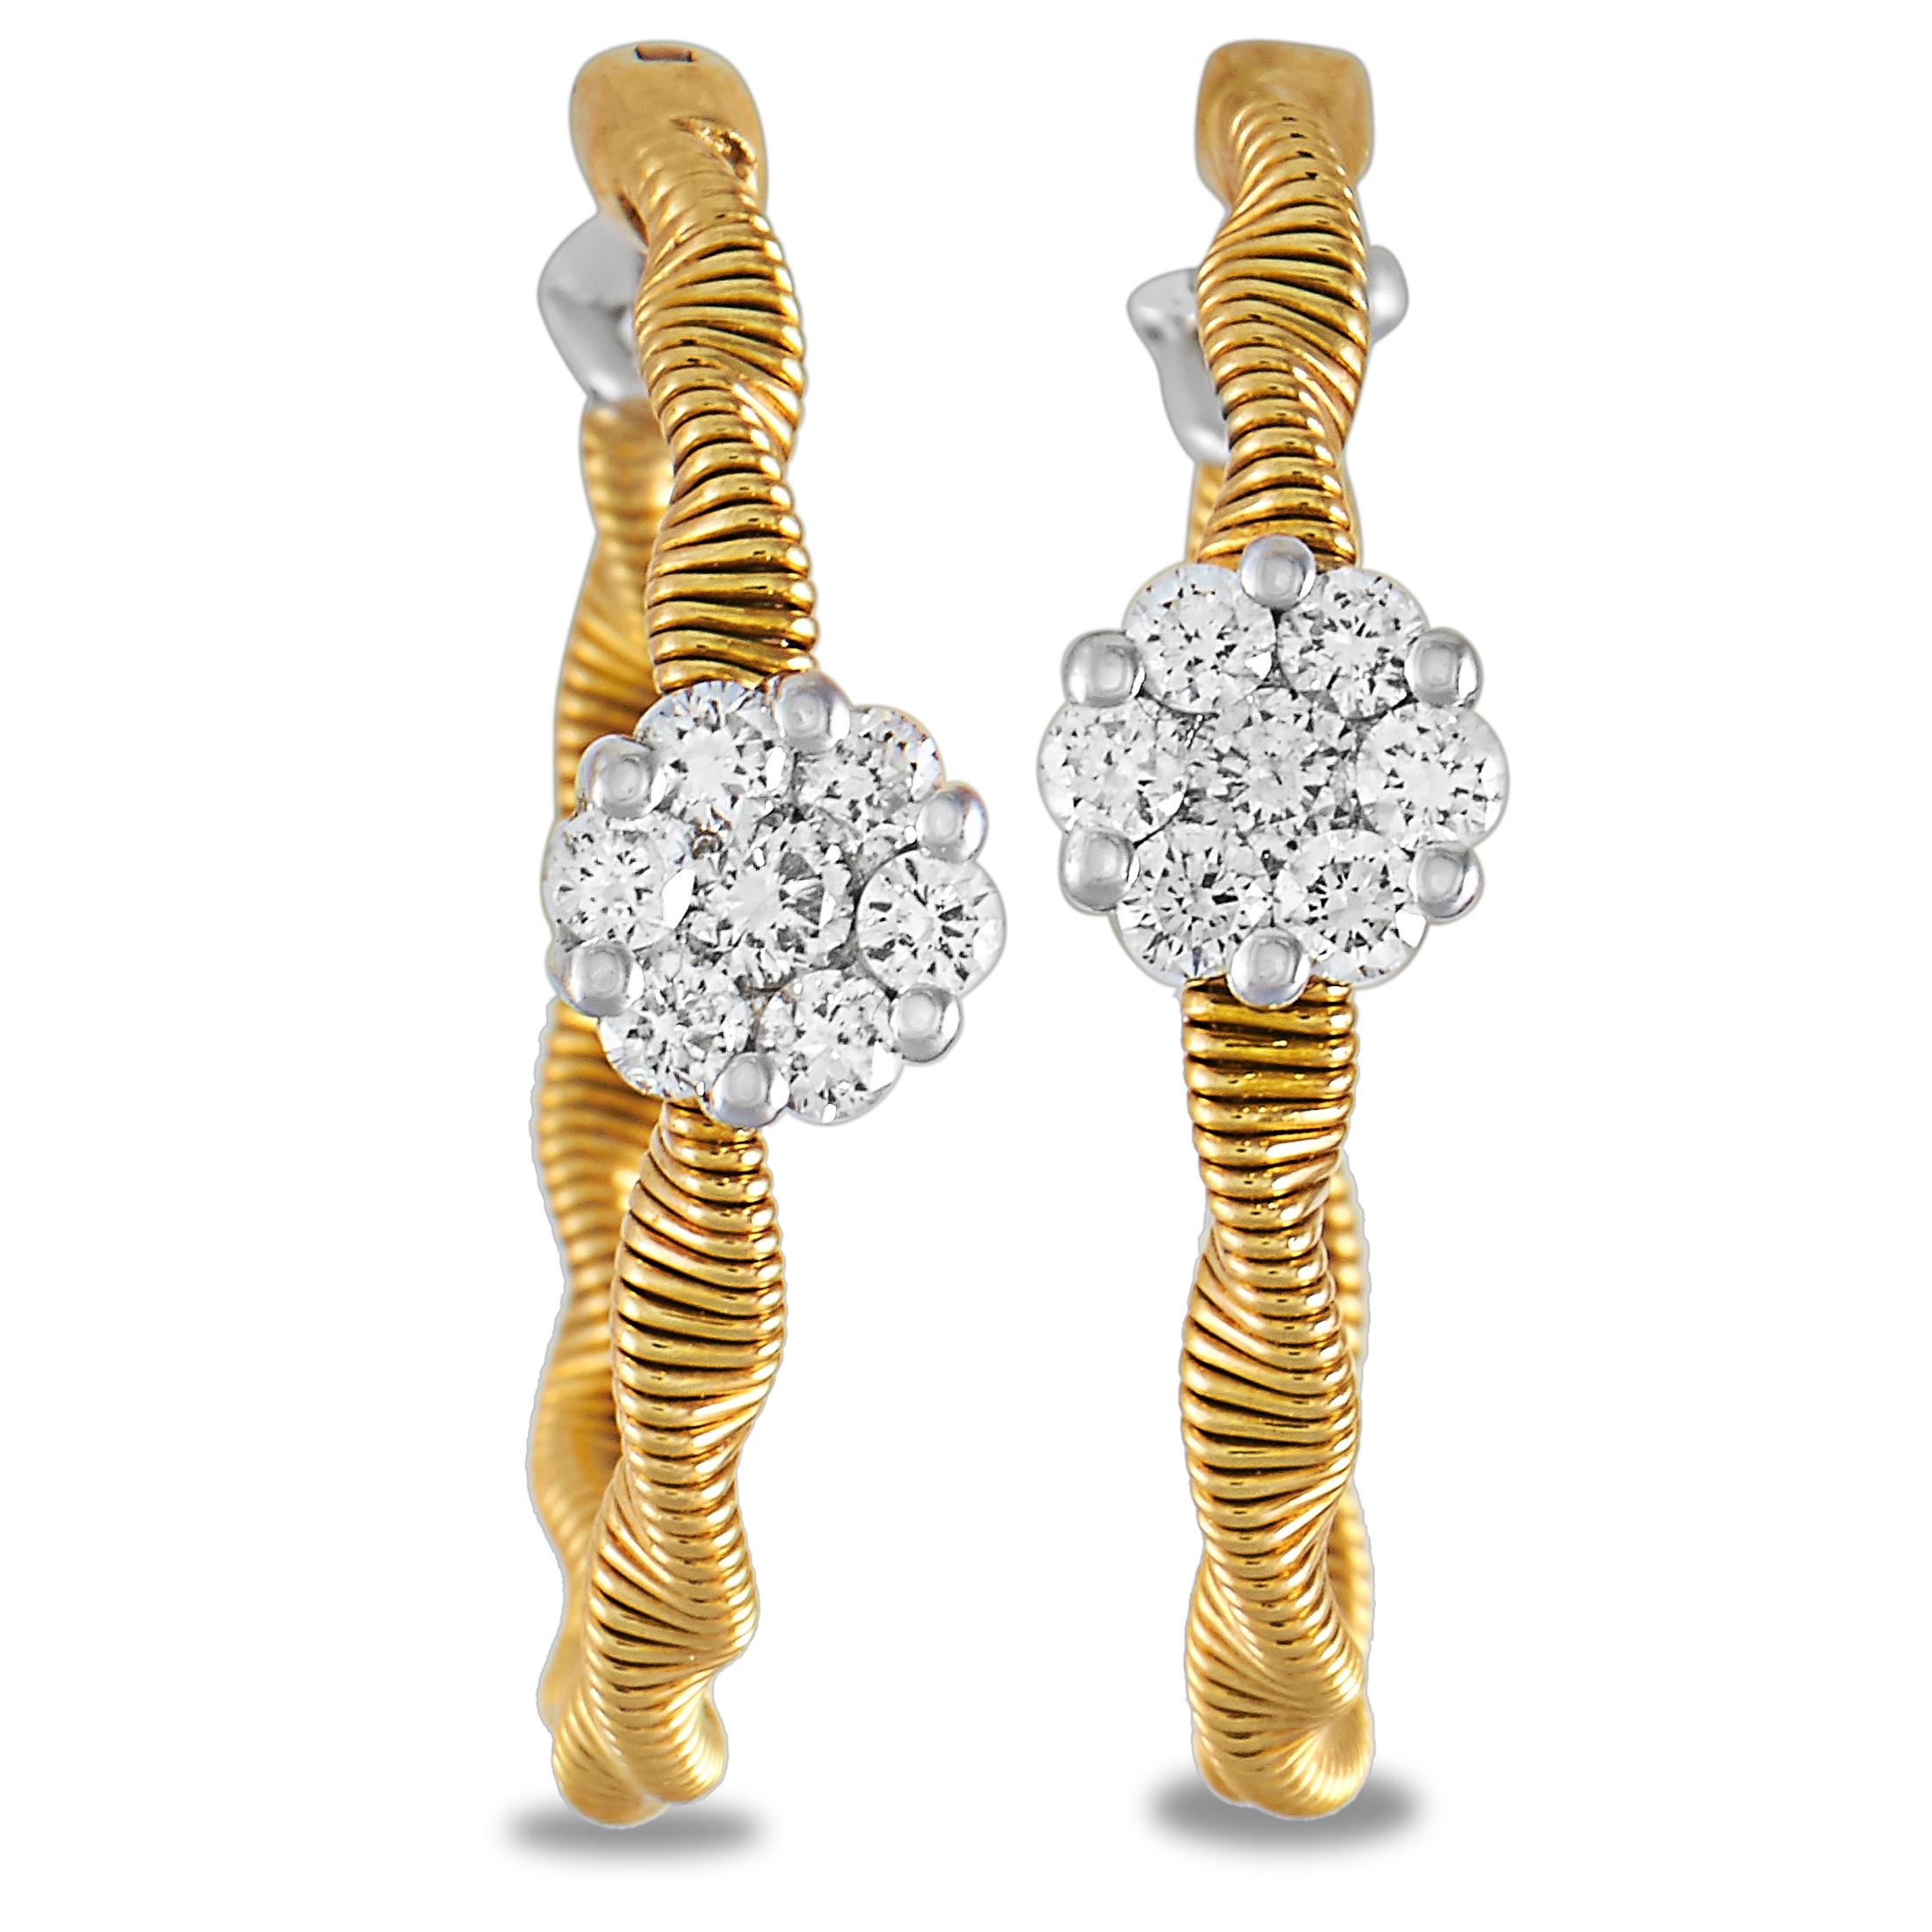 These Oro Trend earrings are crafted from 18K yellow gold and embellished with diamonds that amount to 0.34 carats. The earrings measure 0.90” in length and 0.20” in width and each of the two weighs 2.2 grams.
 
 The pair is offered in brand new